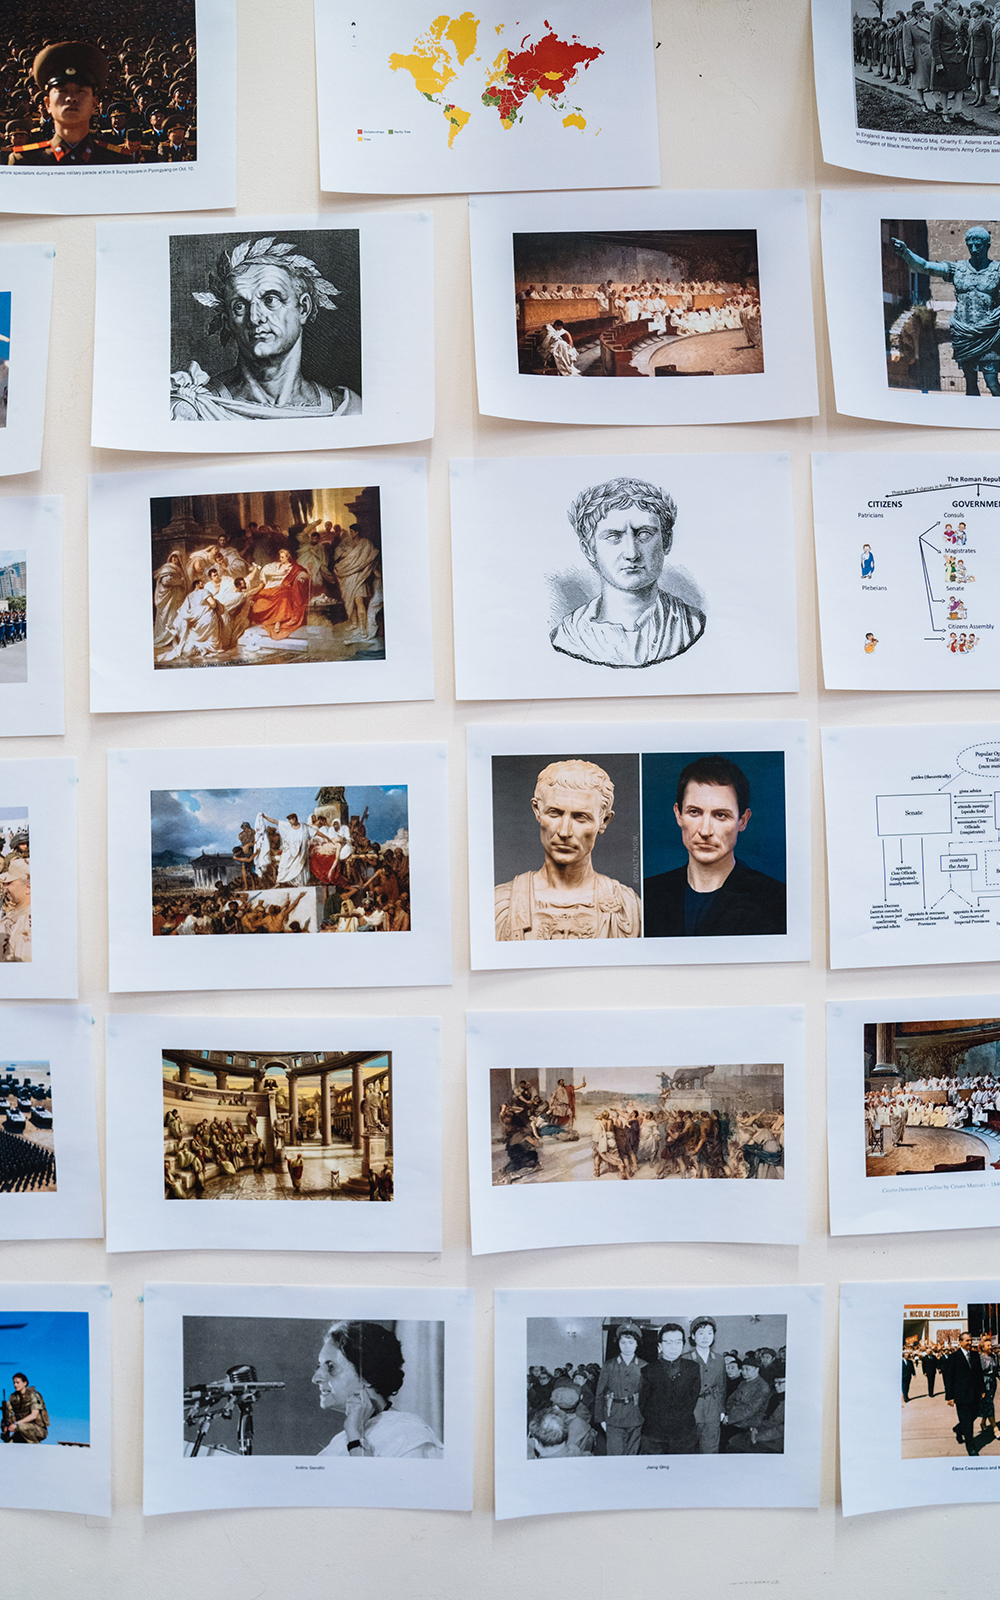 [image] A series of printed images are pinned to a rehearsal room wall depicting historical paintings and status of events and people from Ancient Rome.